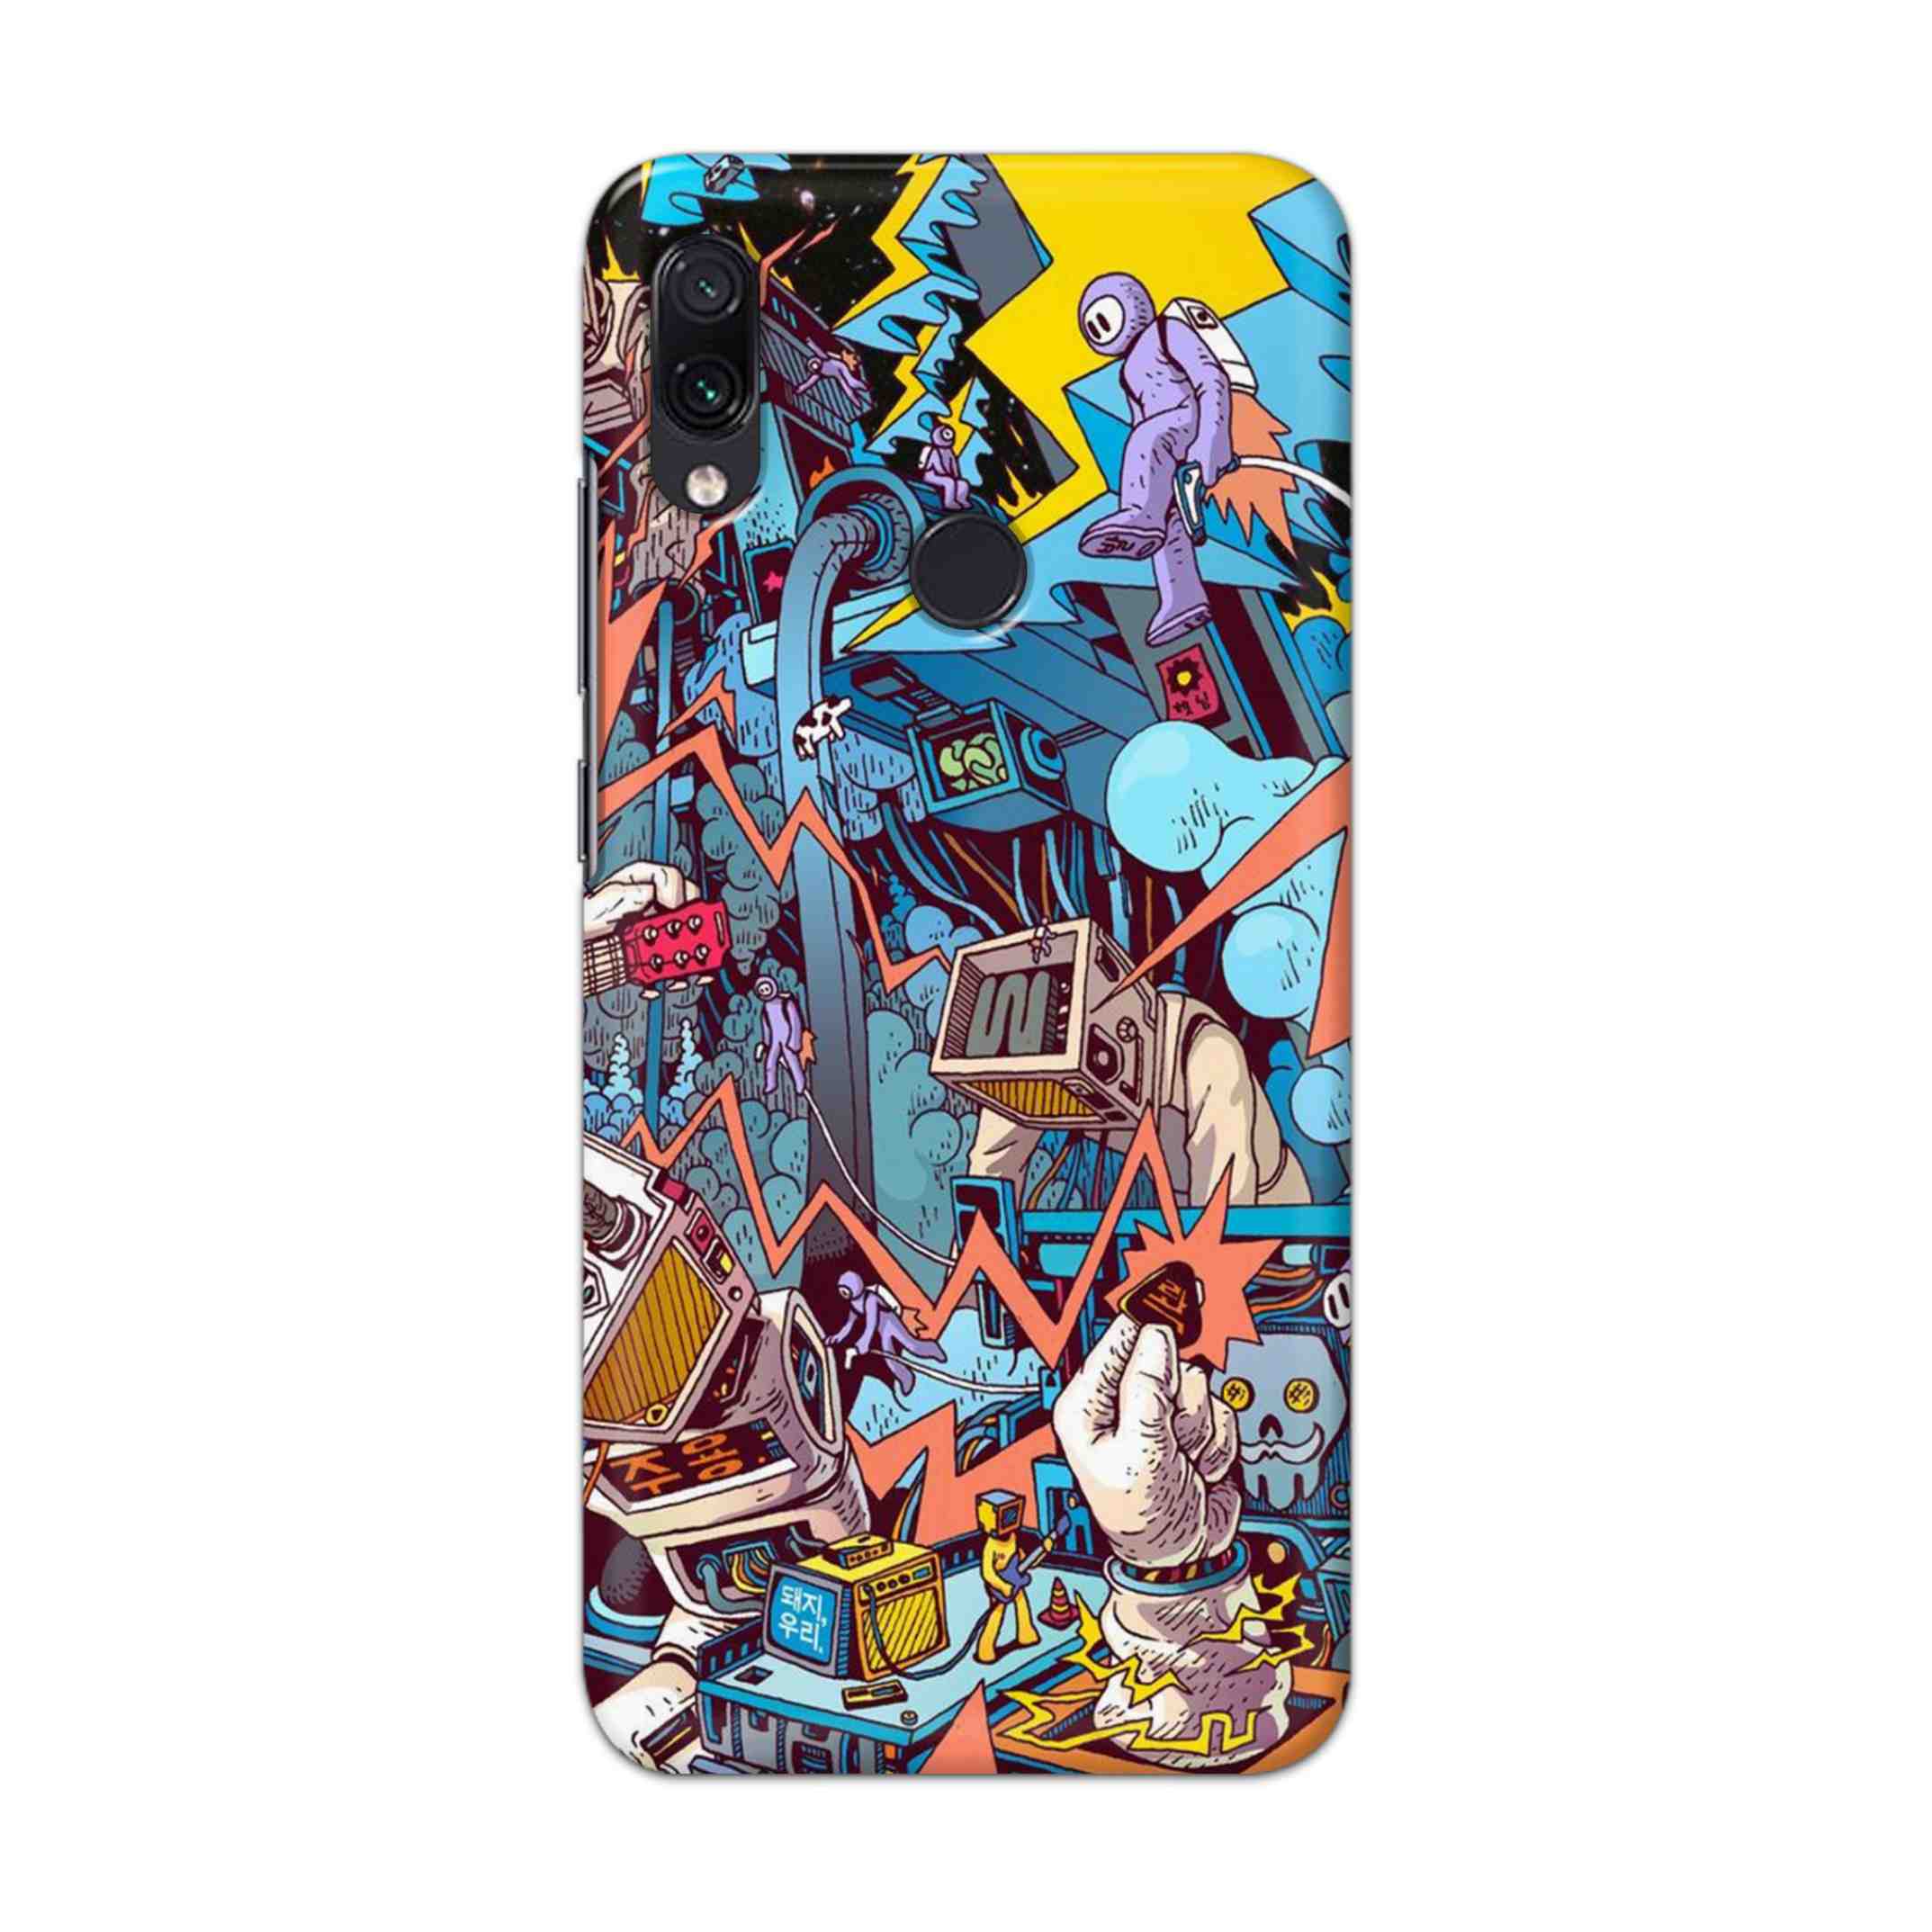 Buy Ofo Panic Hard Back Mobile Phone Case Cover For Xiaomi Redmi 7 Online